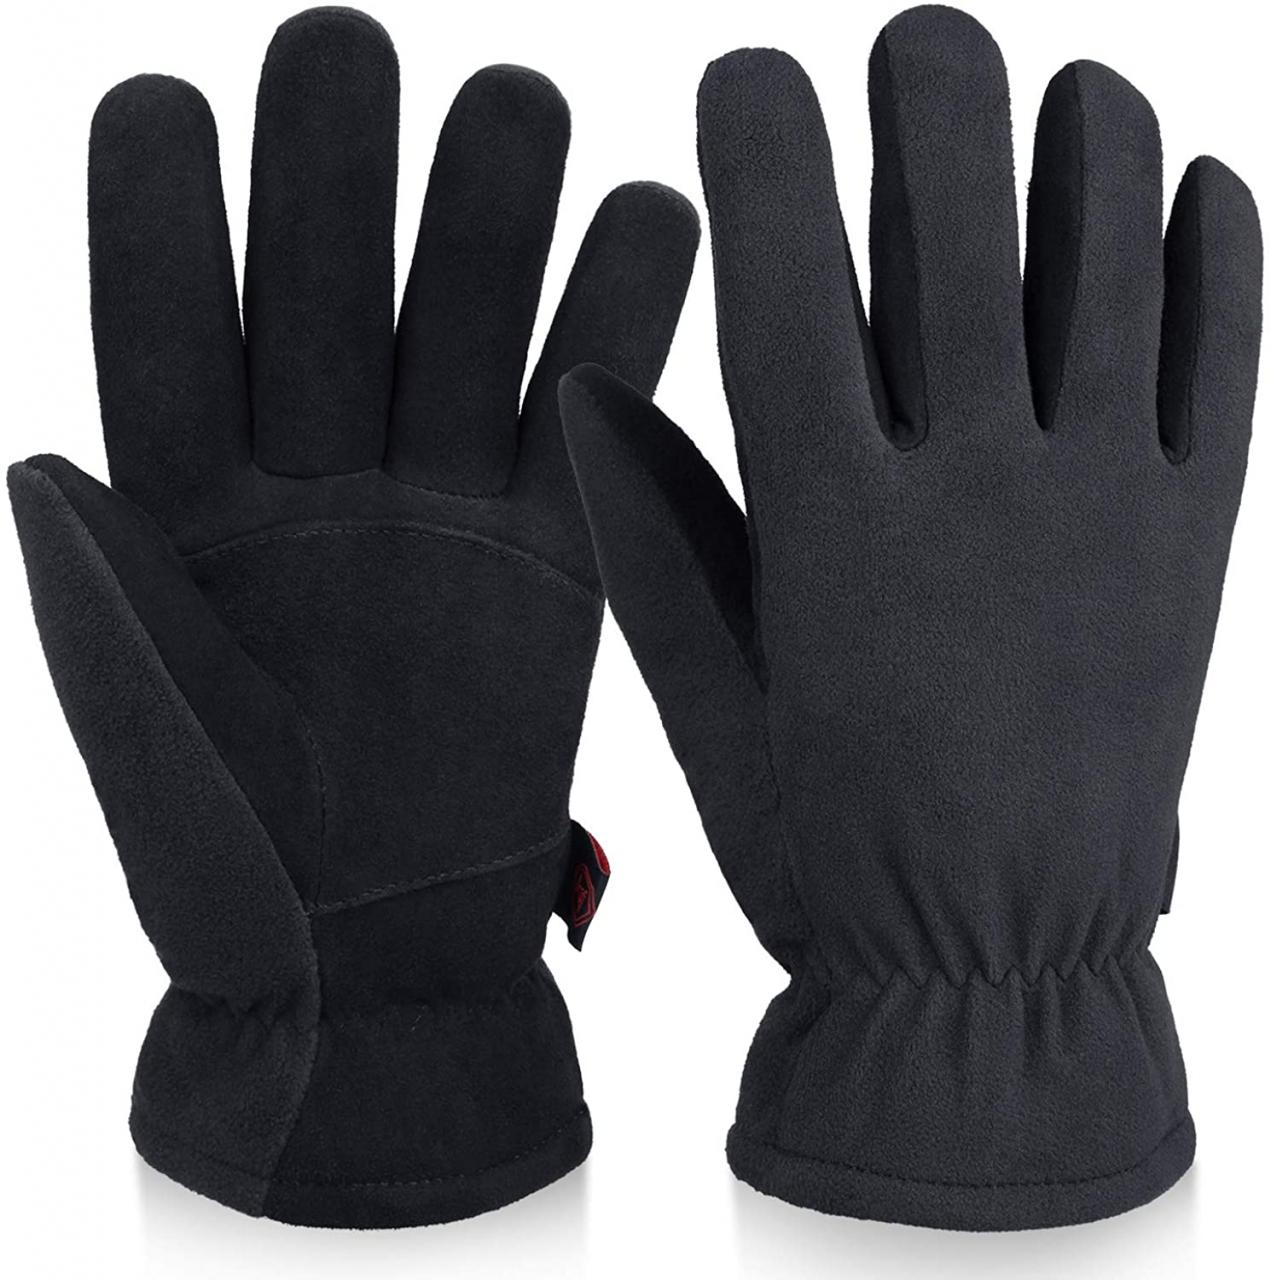 OZERO Winter Gloves Review - Are These Gloves Good Value Or Just Cheap? |  Warmest Gloves